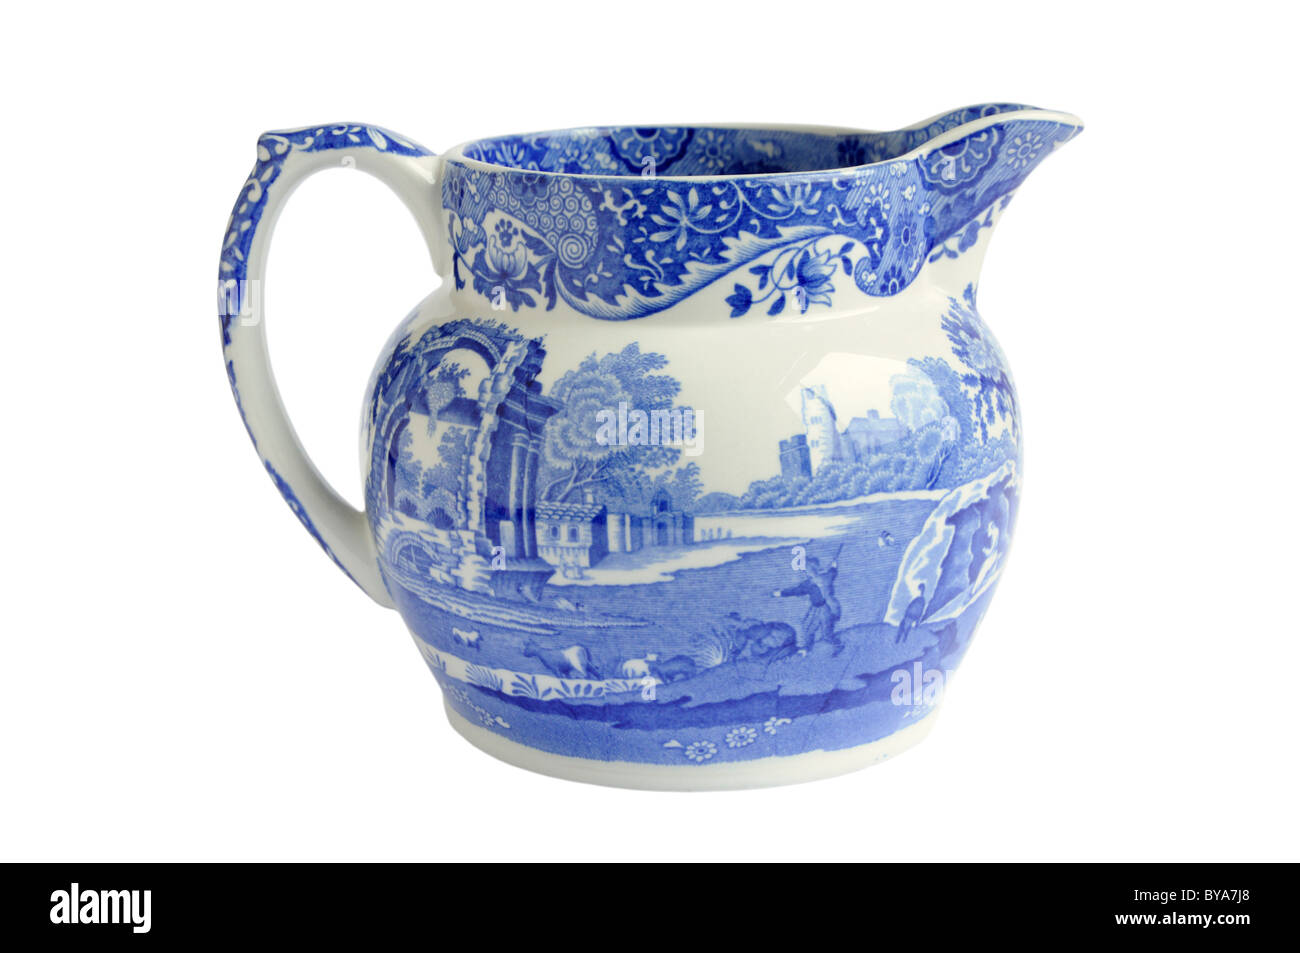 Blue and white Spode willow pattern jug Stock Photo